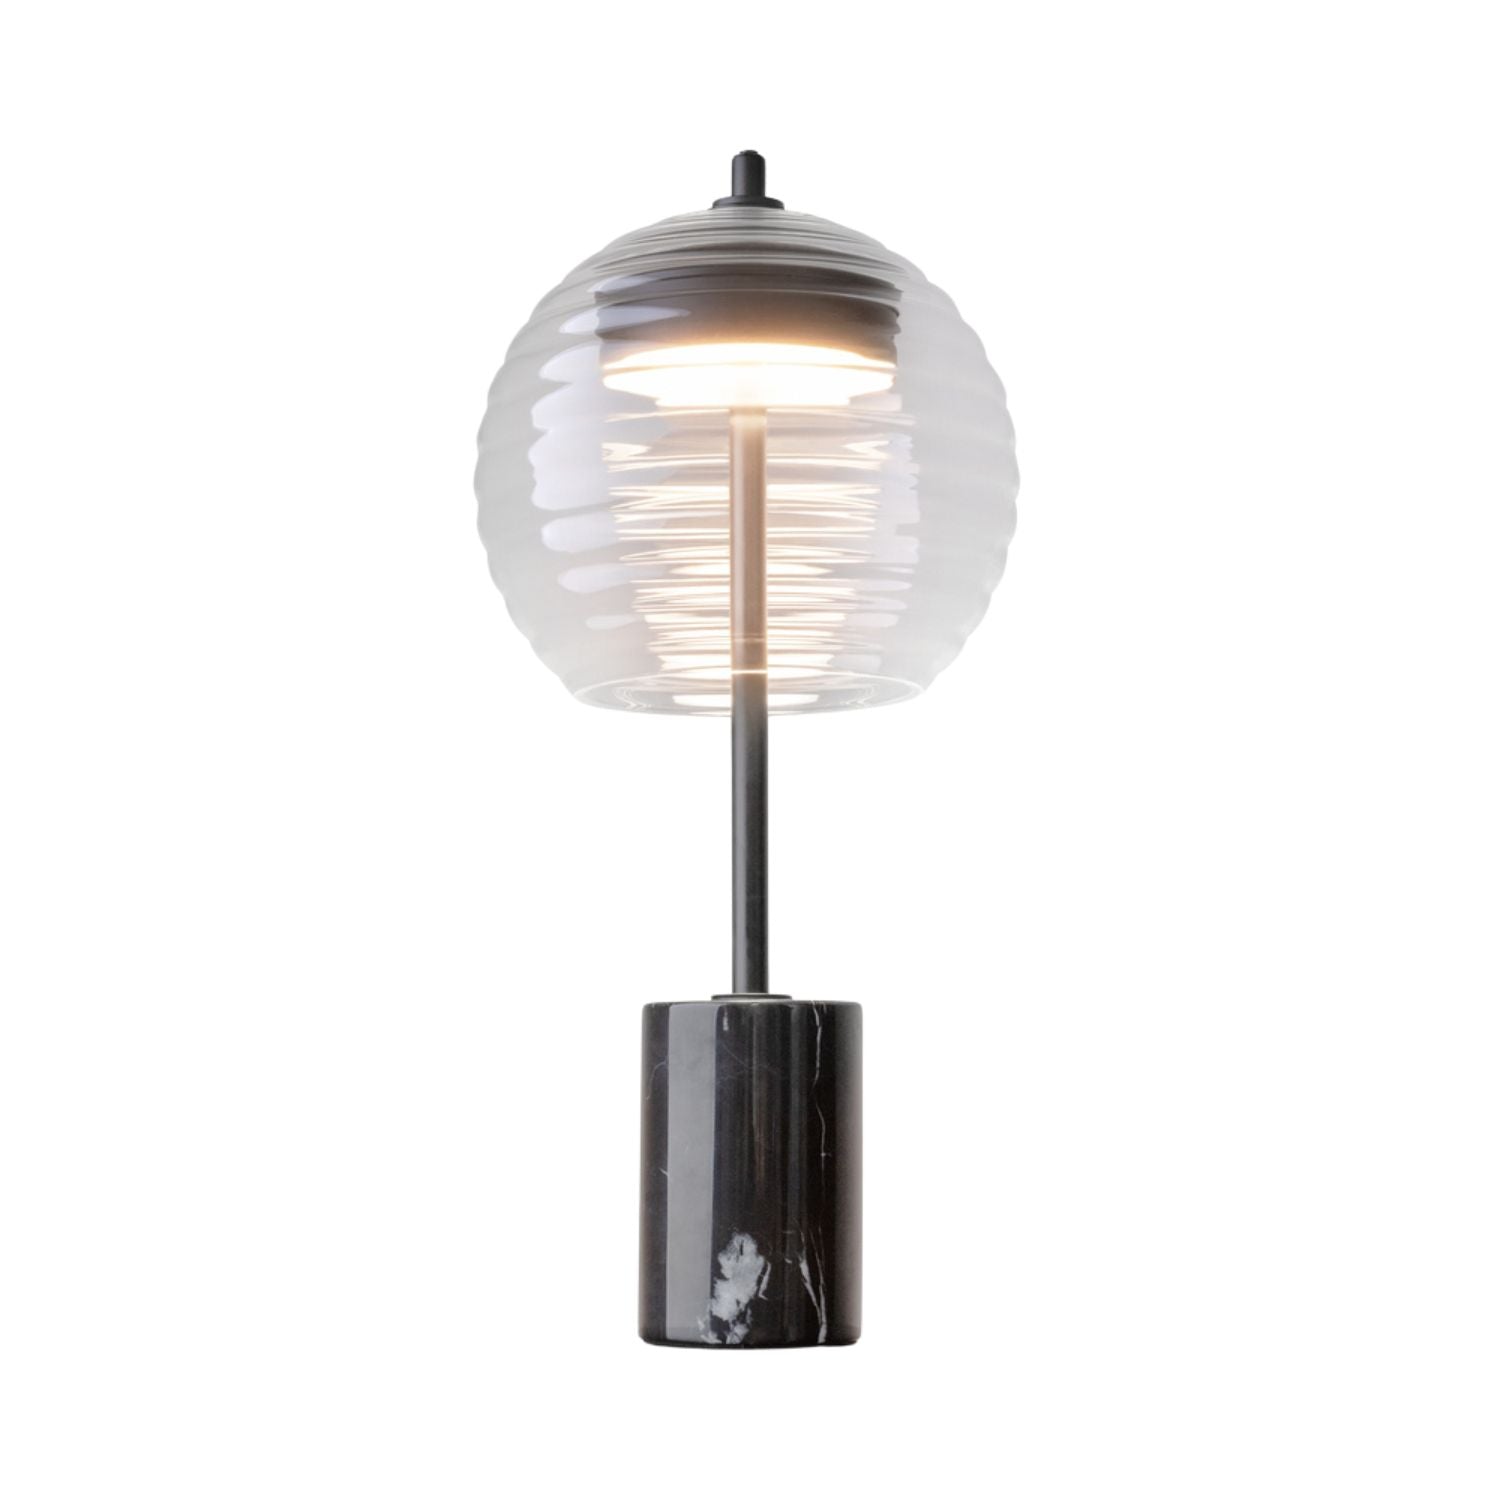 MYSTIC - Black marble and glass table lamp